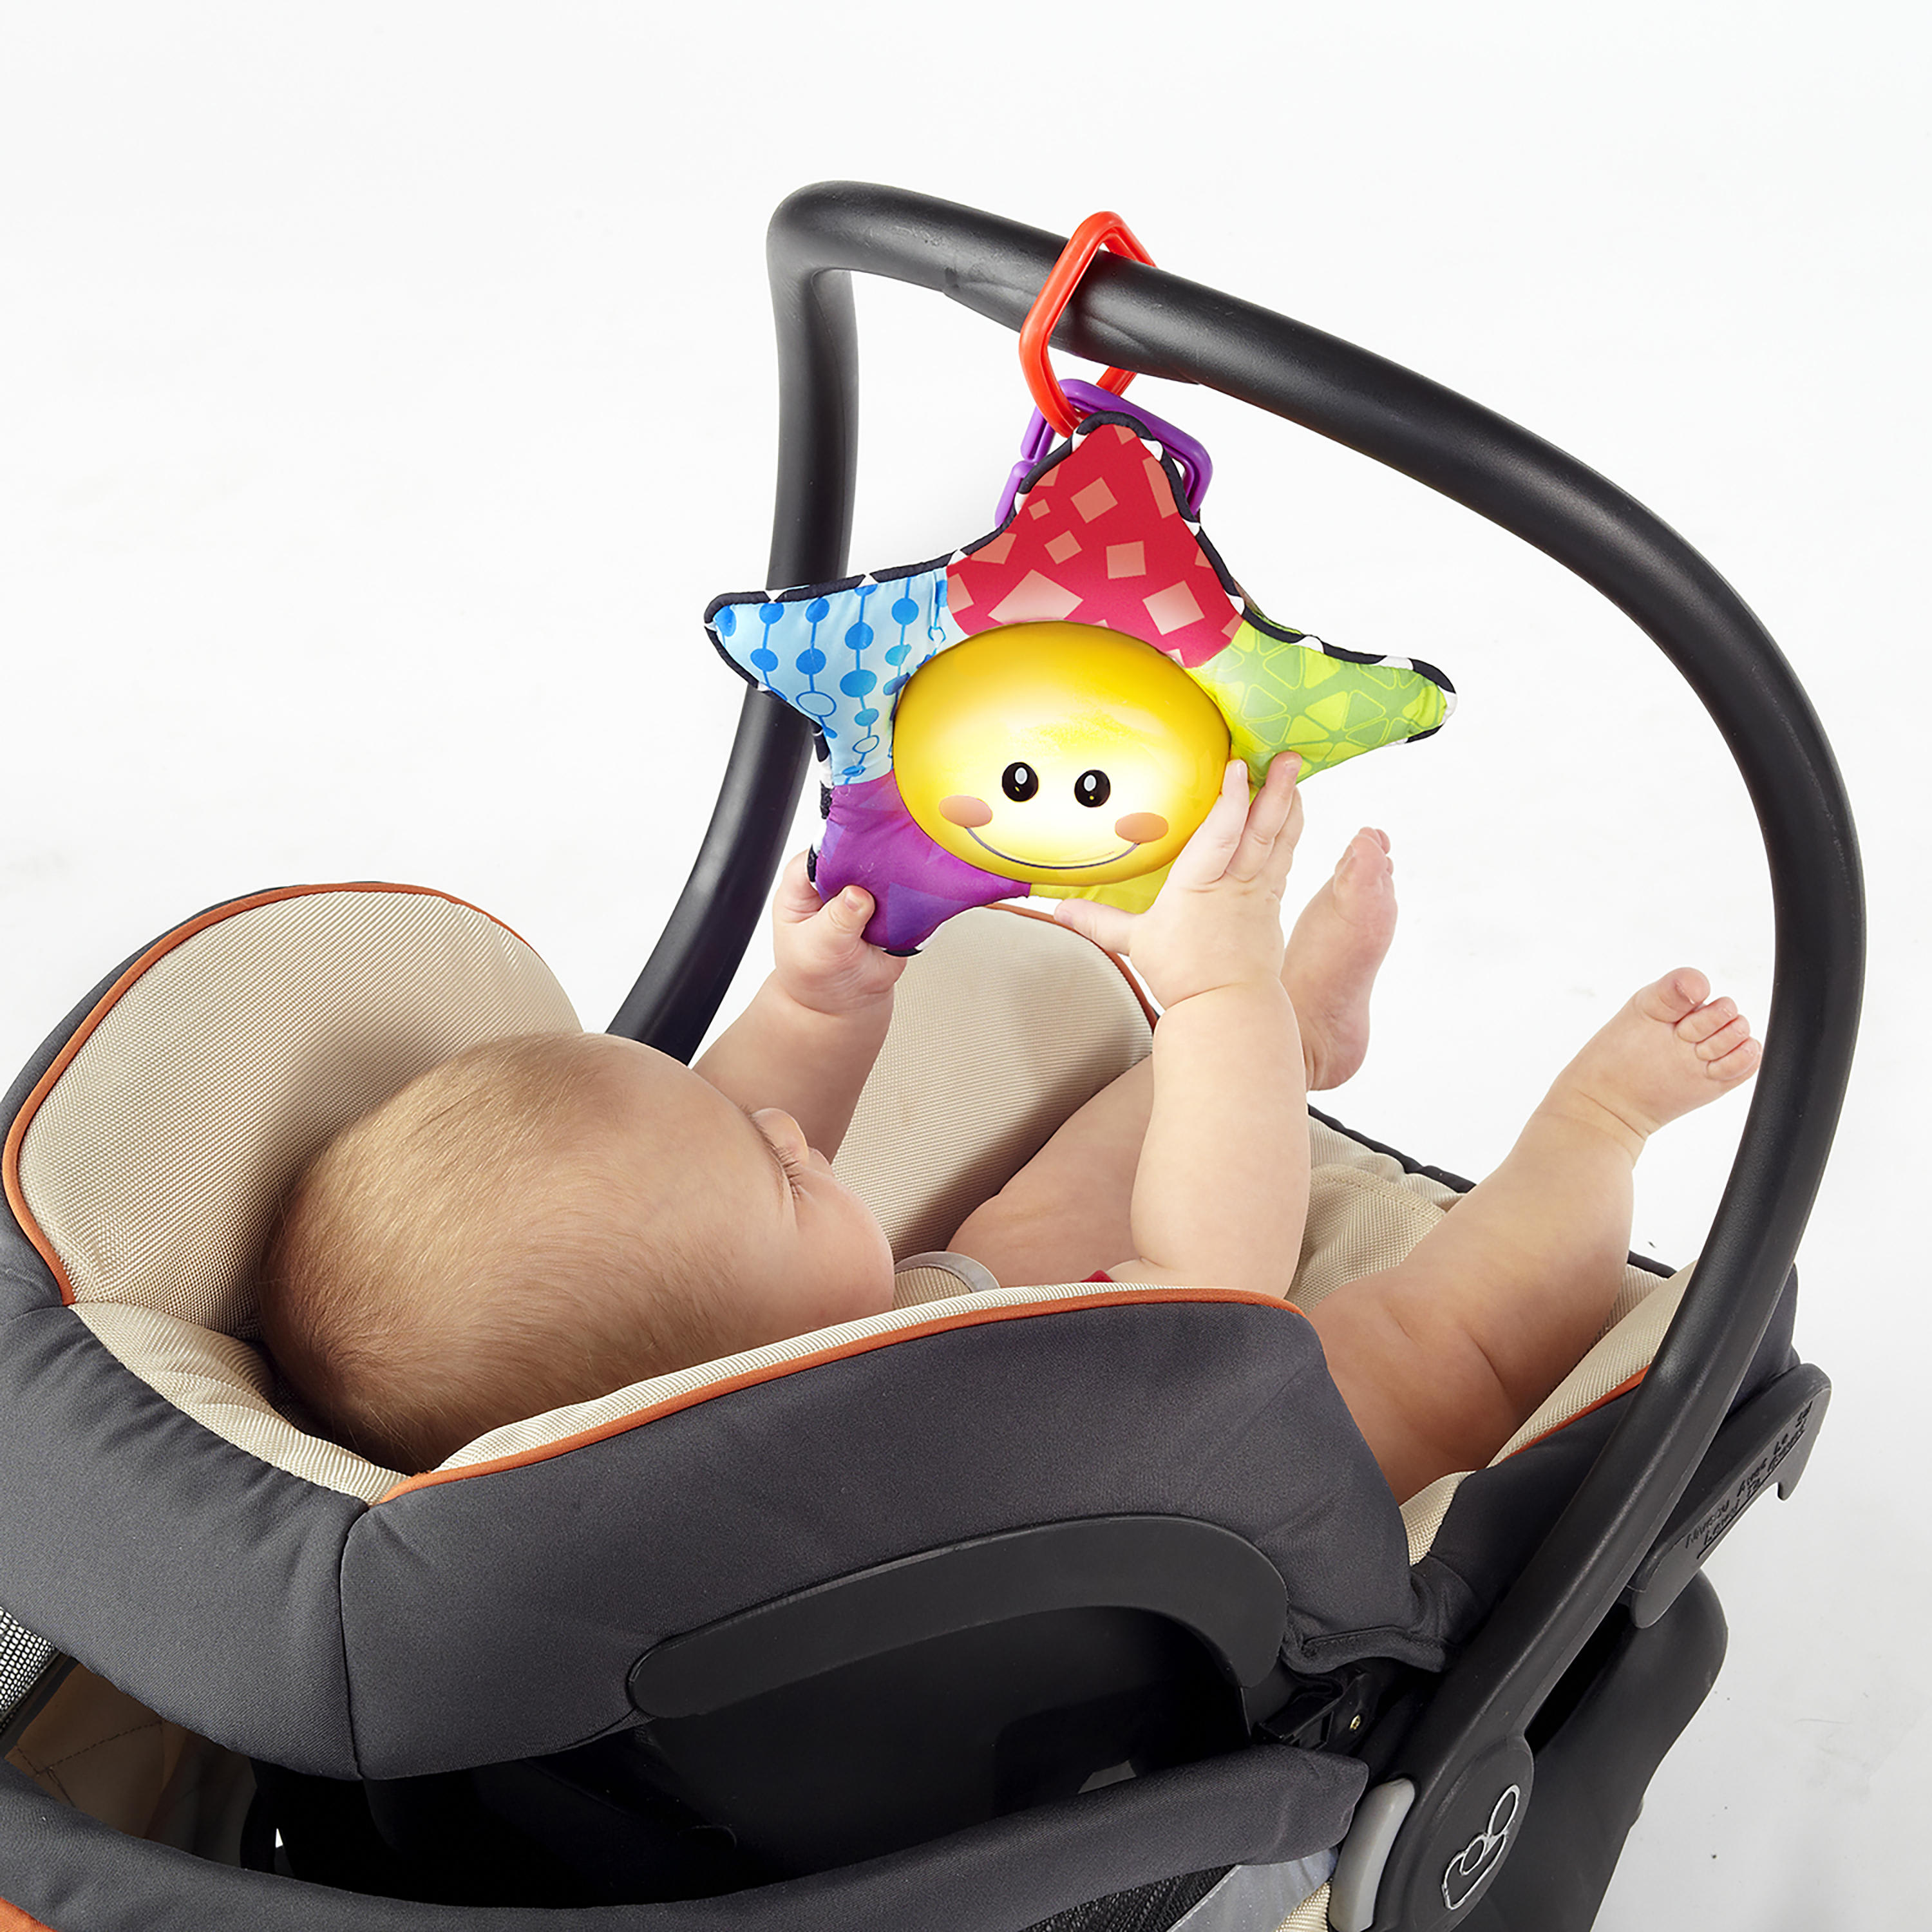 Baby Einstein Caterpillar and Friends Lights and Music Infant Activity Mat - image 5 of 13